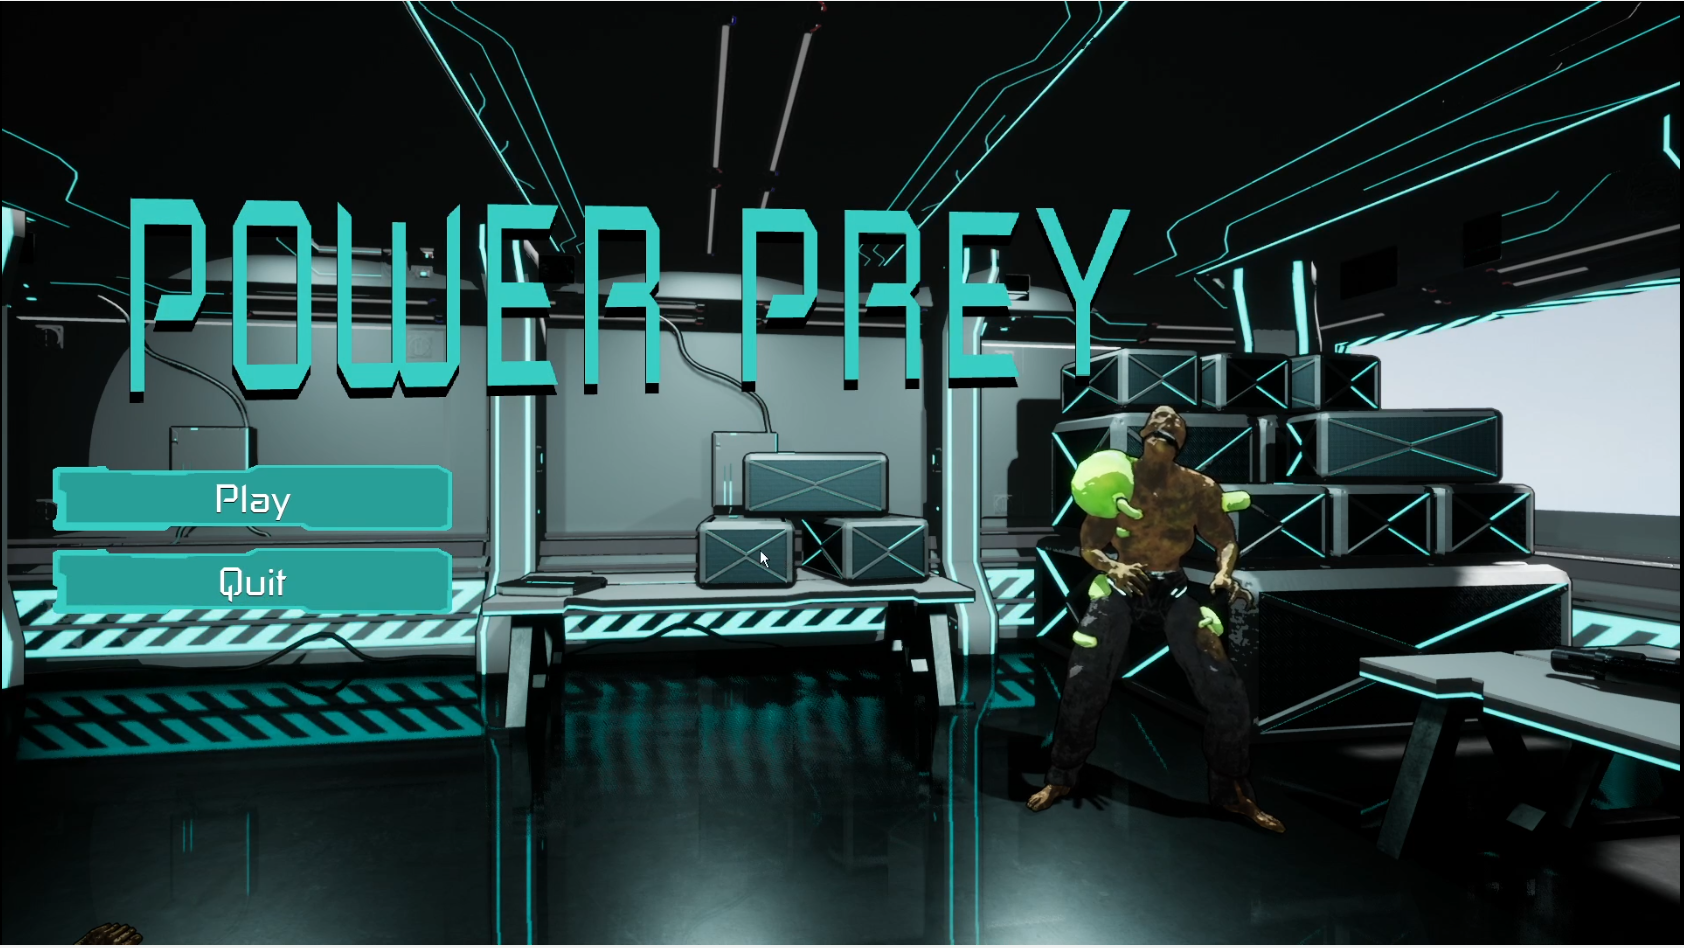 Power Prey - GGJ 2022 Submission (Updated)